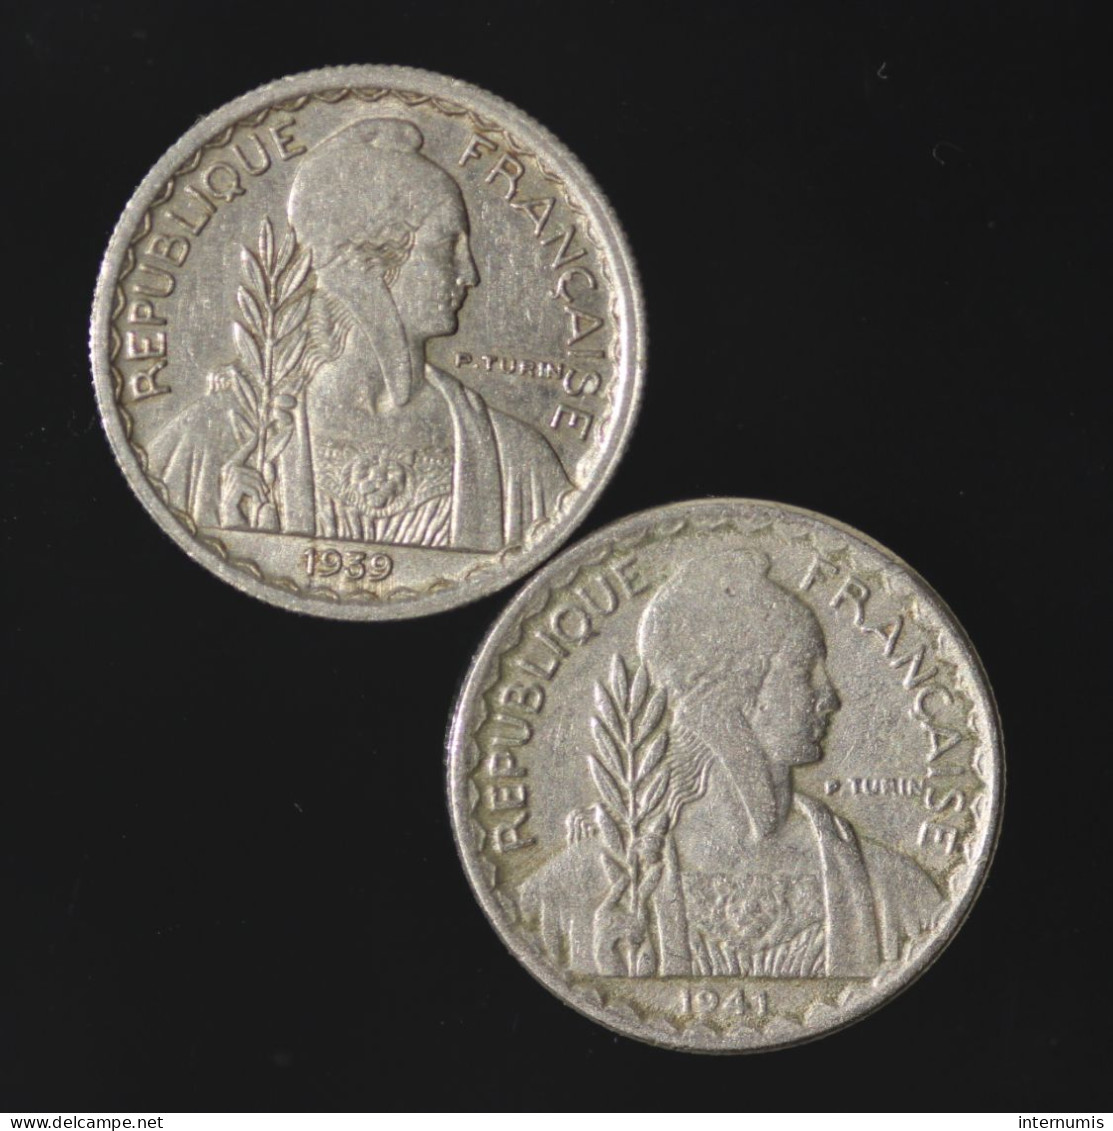 Indochine / Indochina, Lot (2) 10 Centimes : 1939 & 1941-S - Lots & Kiloware - Coins